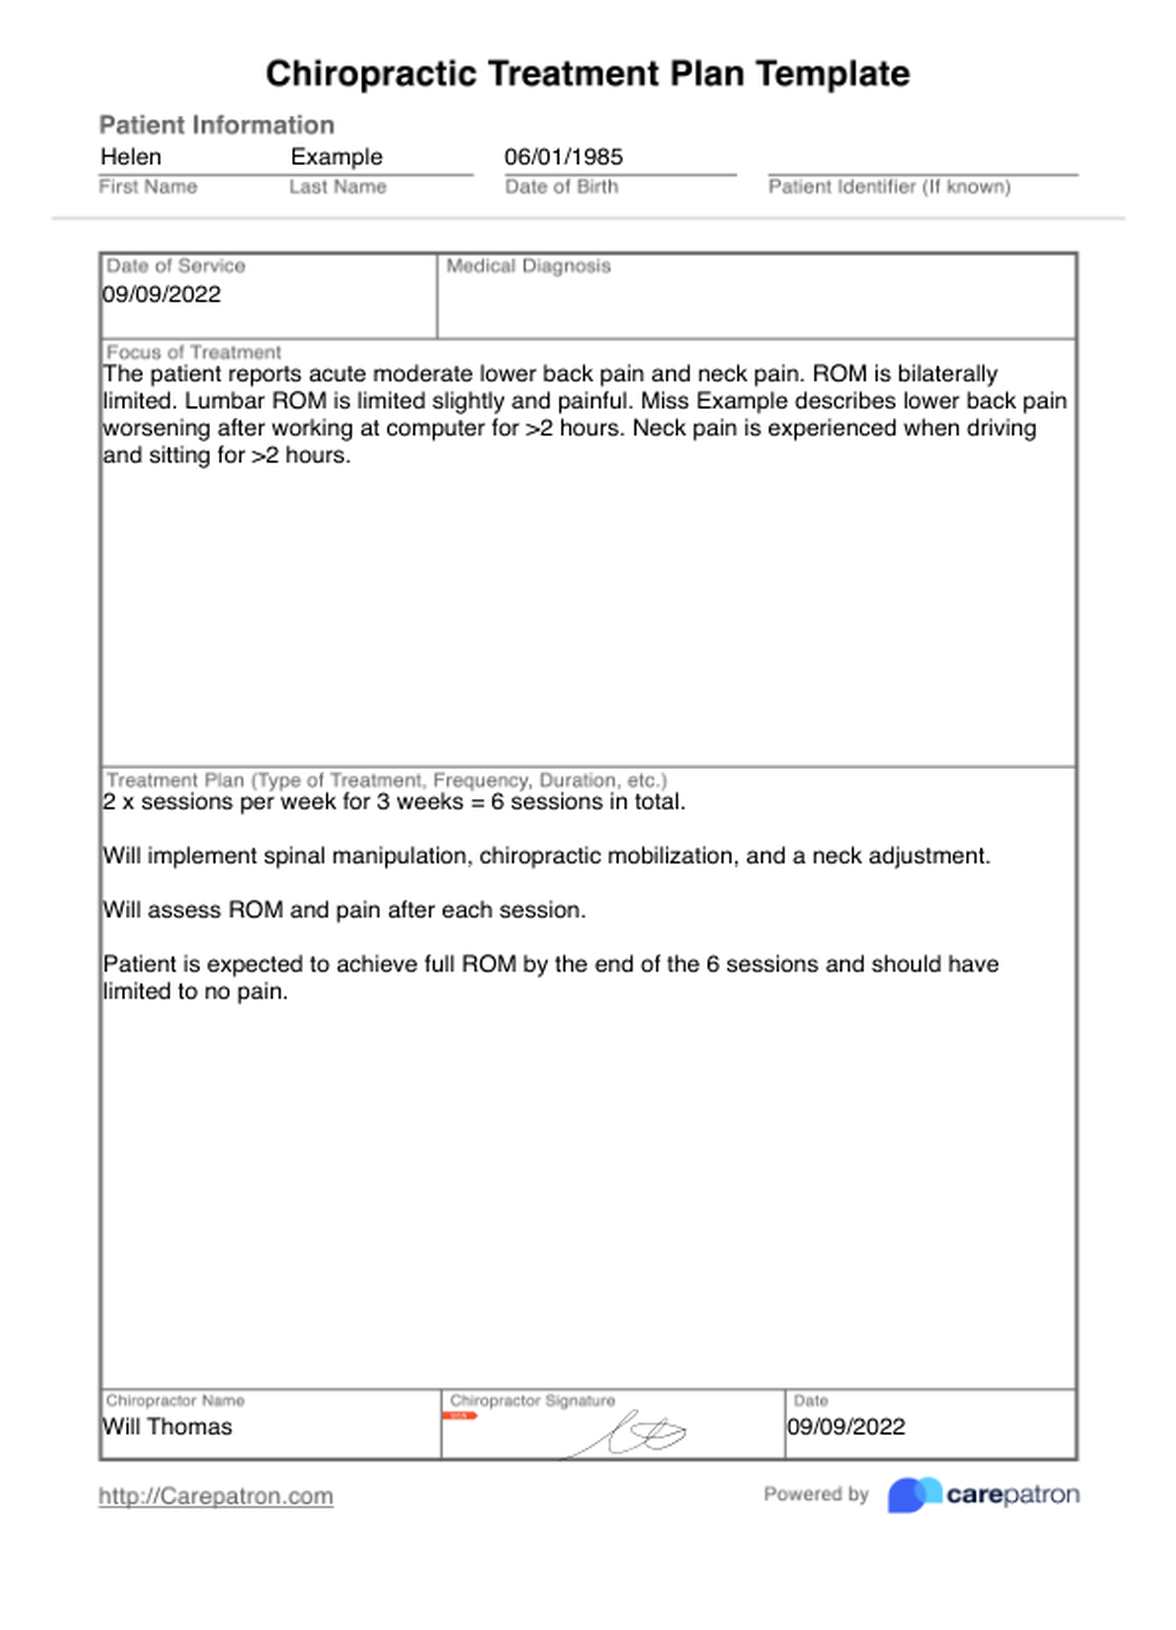 Chiropractic Treatment Plan Template PDF Example